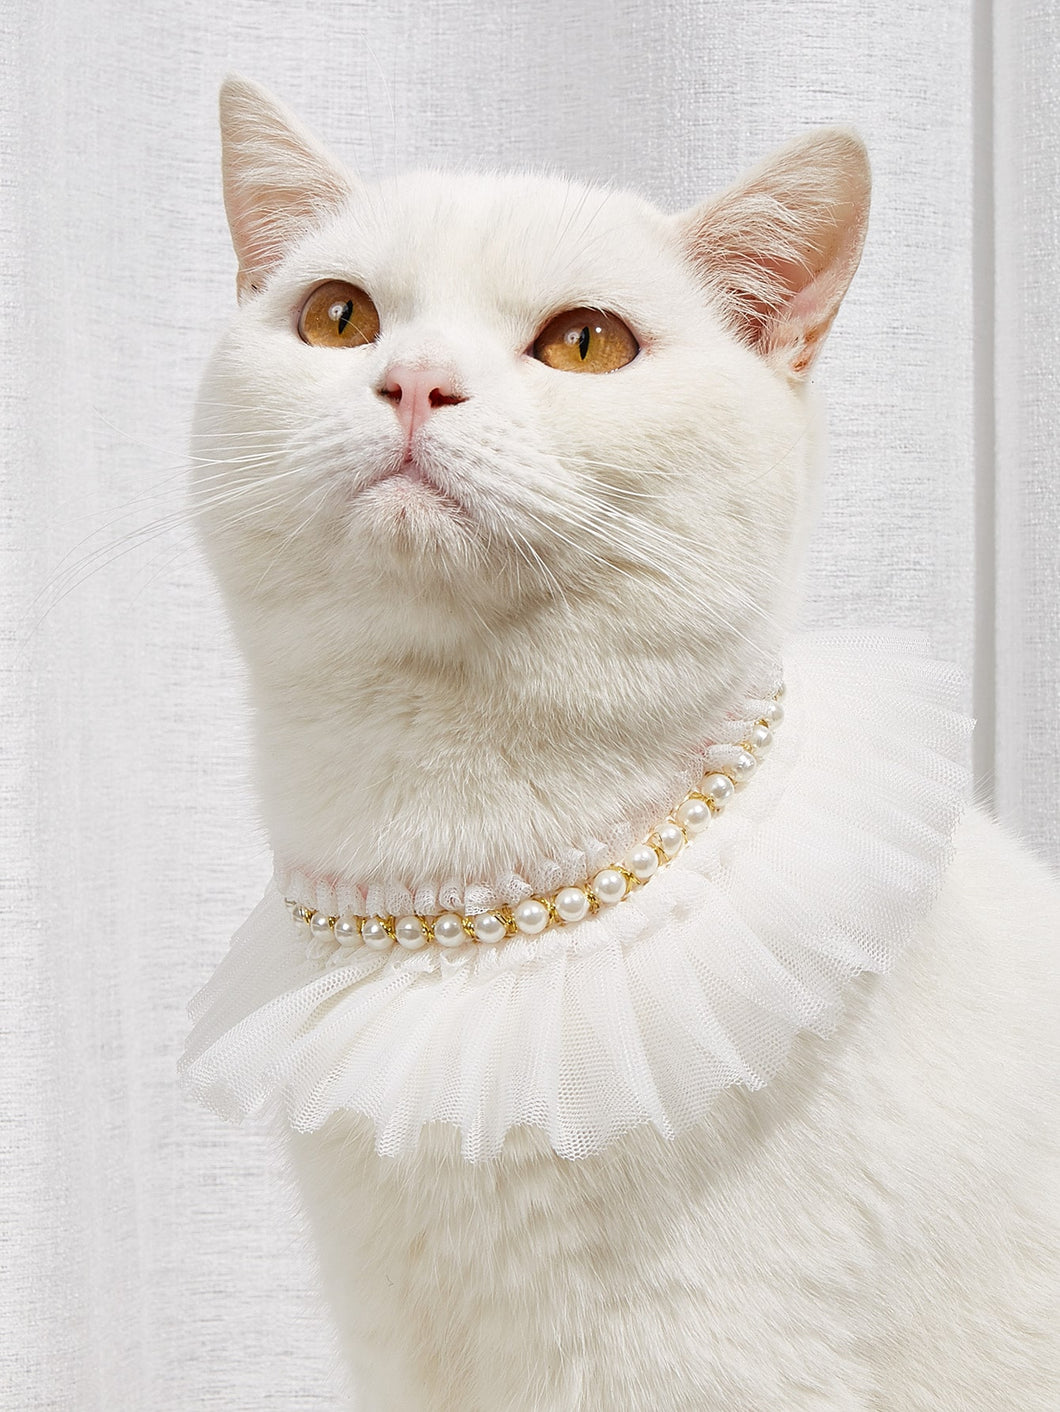 'Faux Pearl Decor Lace Pet Bandana' A royal aristo-cat collar! Your lovely cat will be so elegant with this stylish pet collar. Colour: White Pattern Type: Plain Type: Bandana Applicable Pet: Cat/Dog Composition: 100% Polyester Material: Polyester Size (neck): 25-30cm